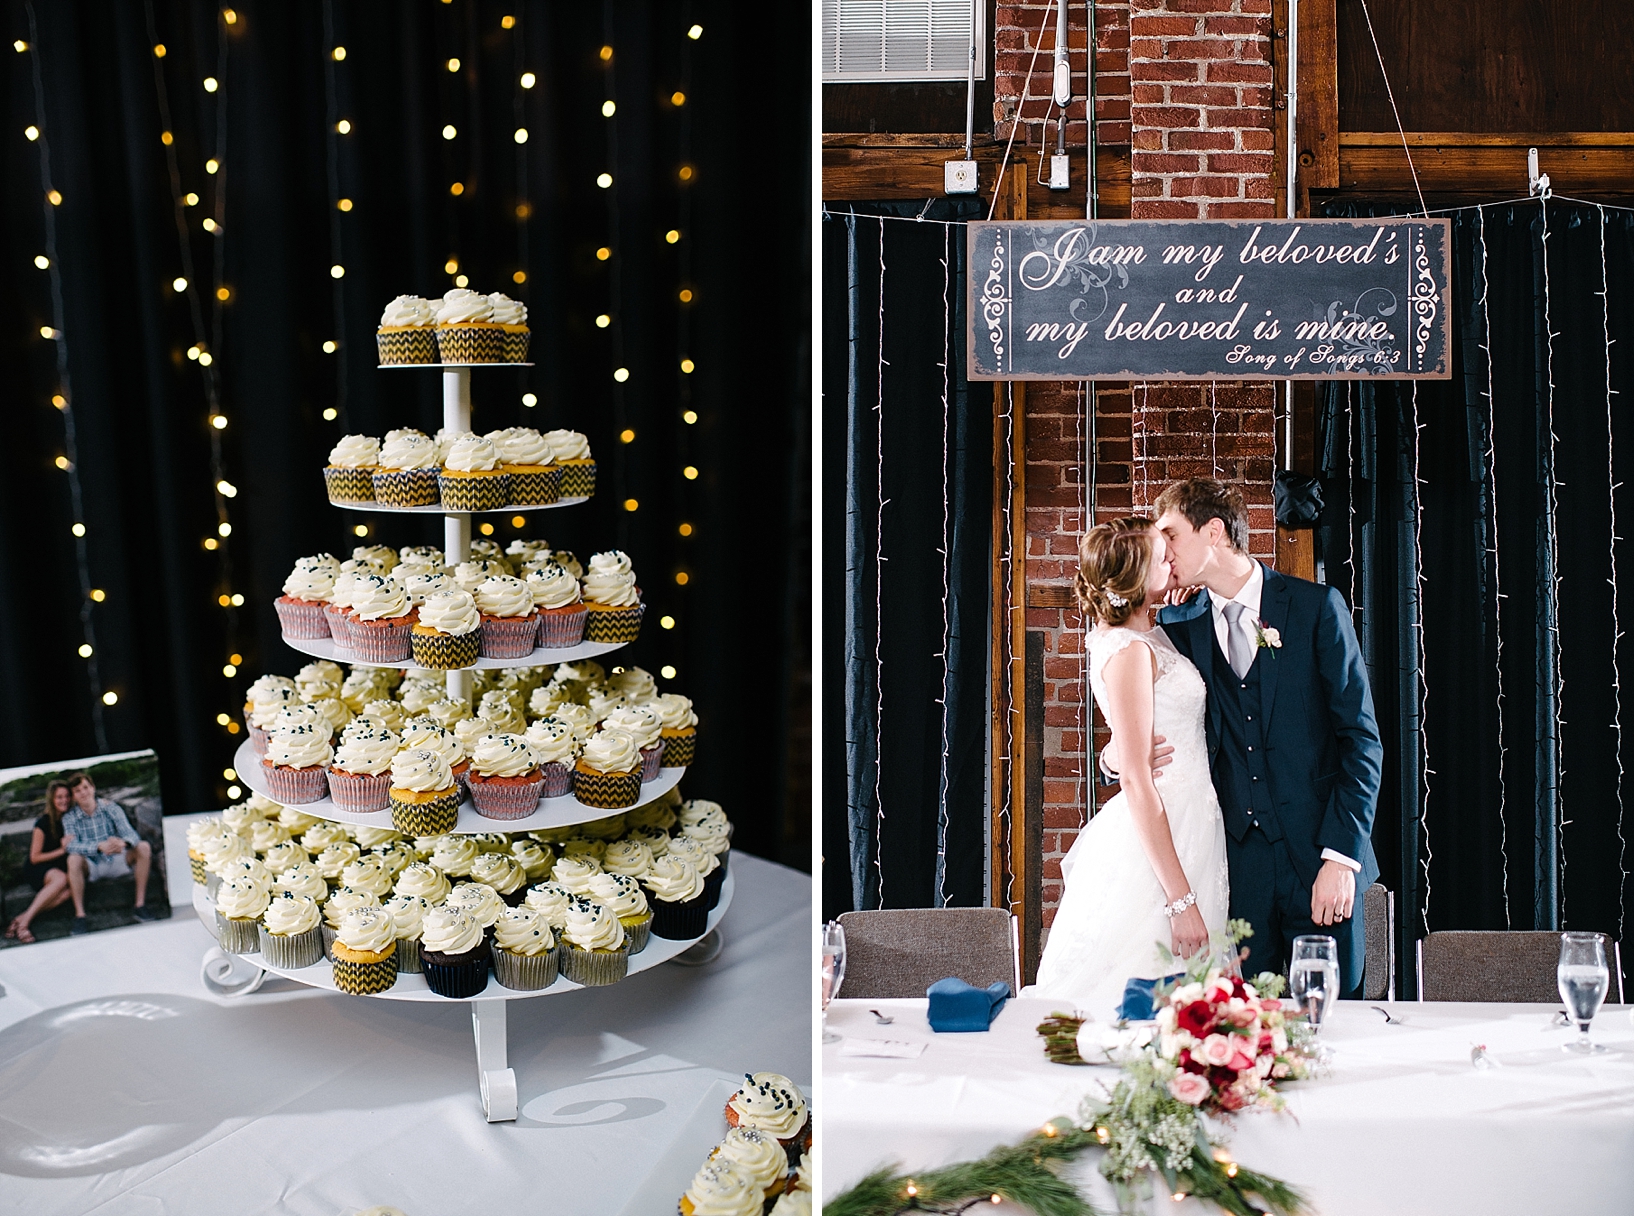 wedding cupcakes and bride and groom kissing at head table